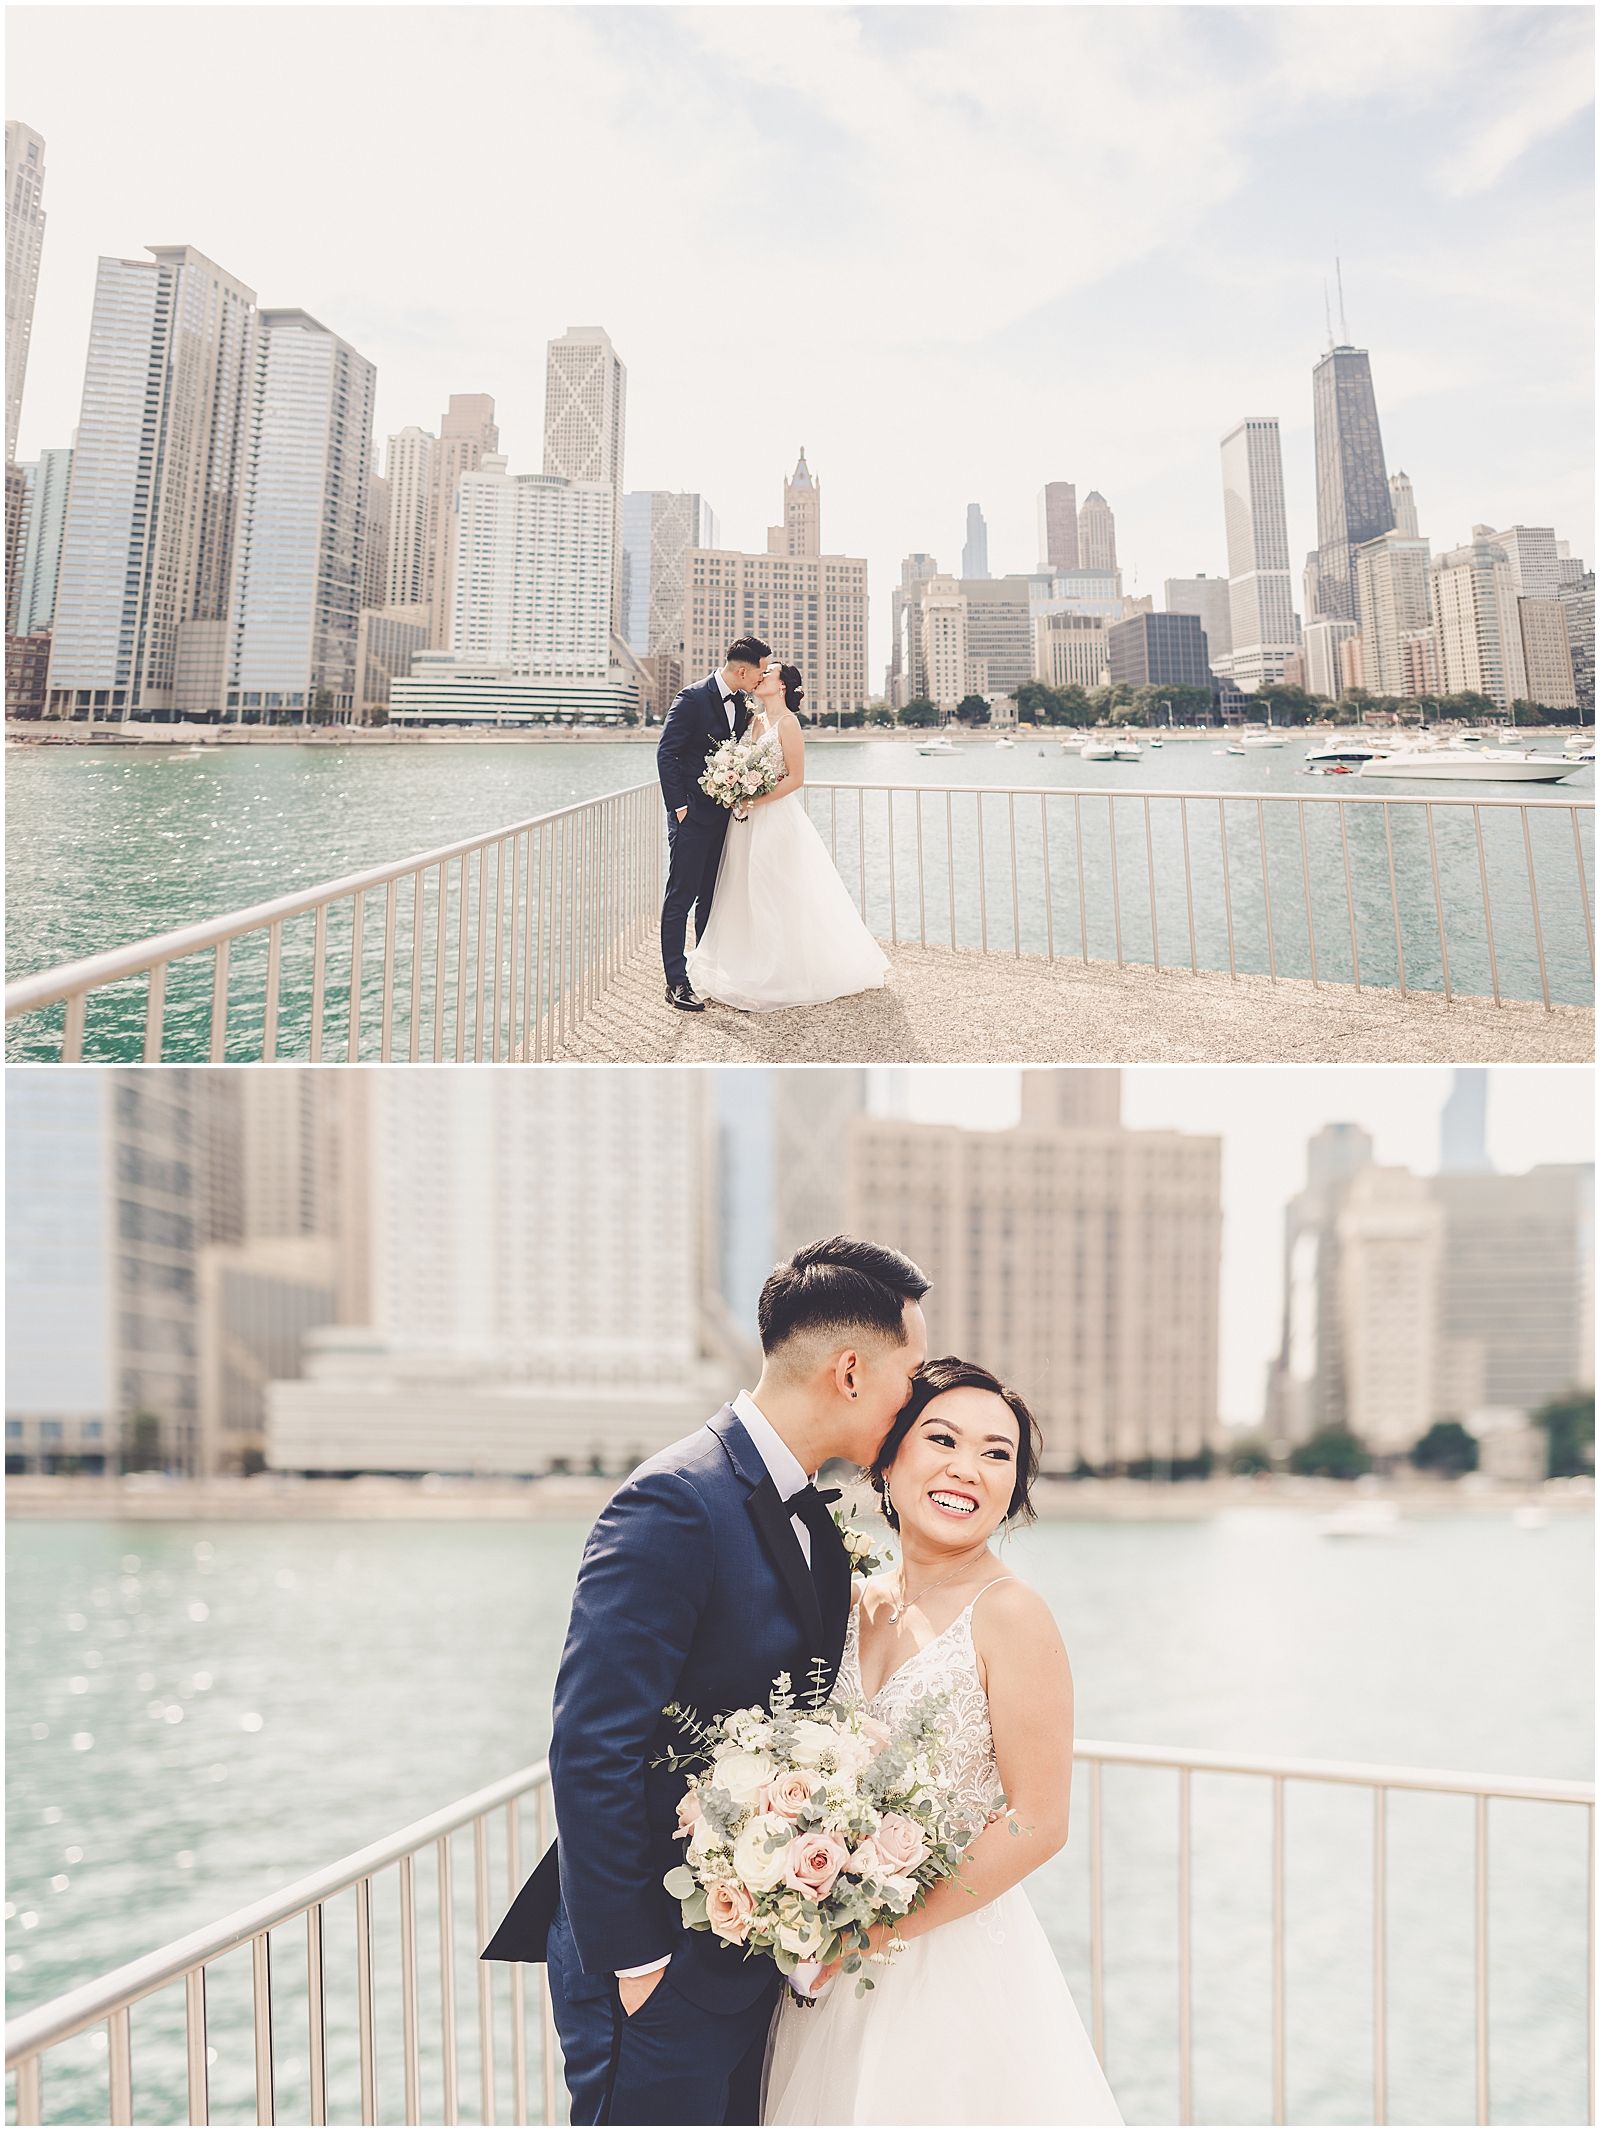 Diana and Osmund's summer wedding day at New Furama in Chicago, Illinois with Chicagoland wedding photographer Kara Evans Photographer.